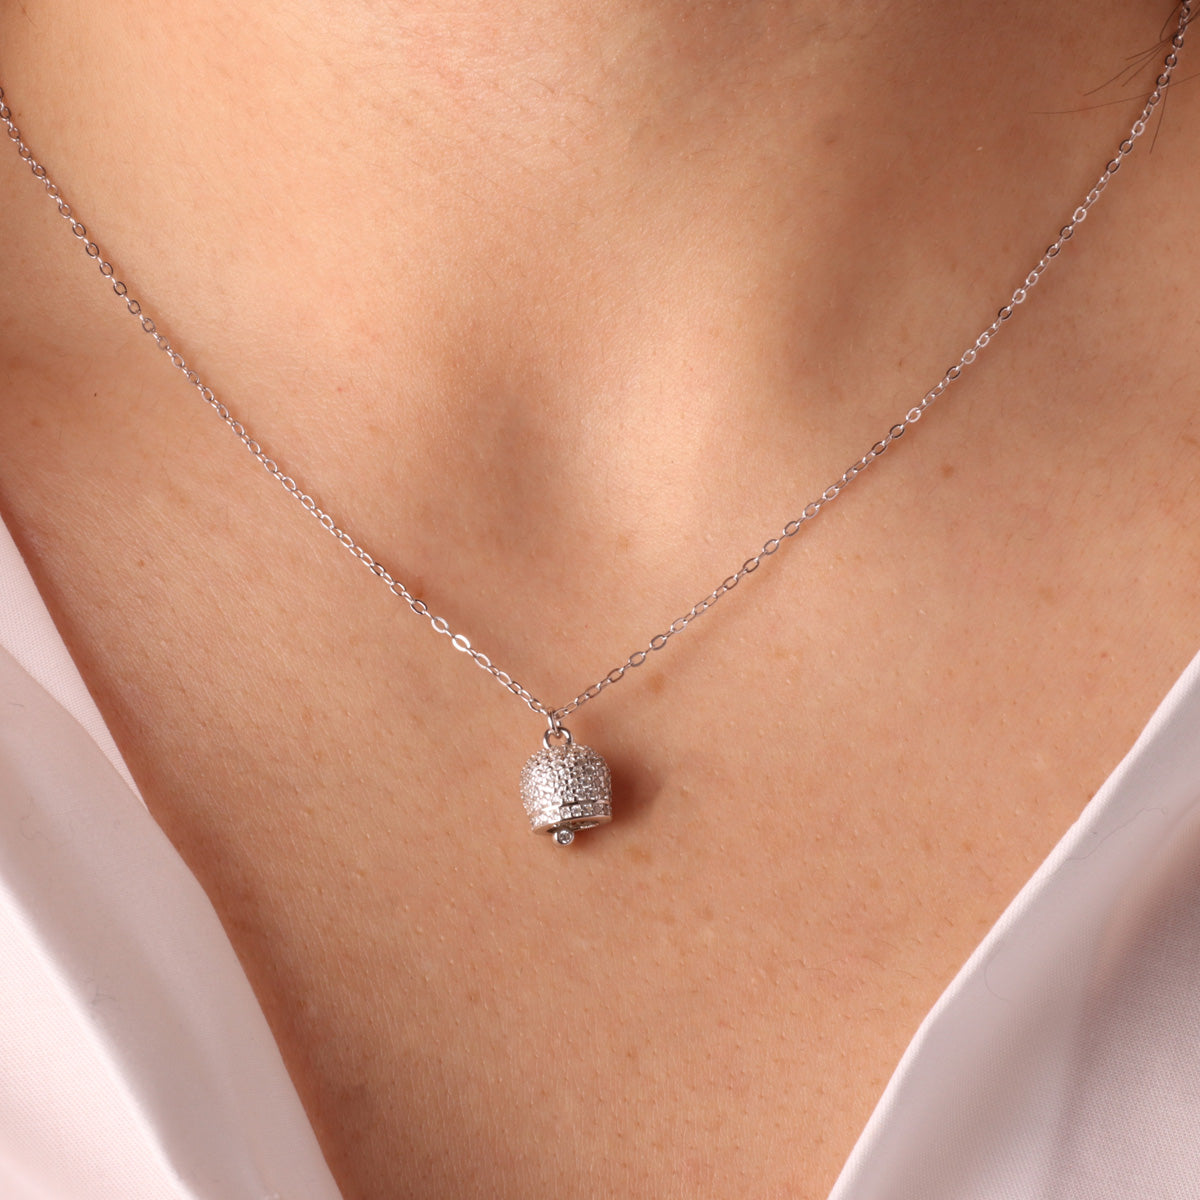 925 silver necklace with charcoal bell of Capri studded by white zirconi